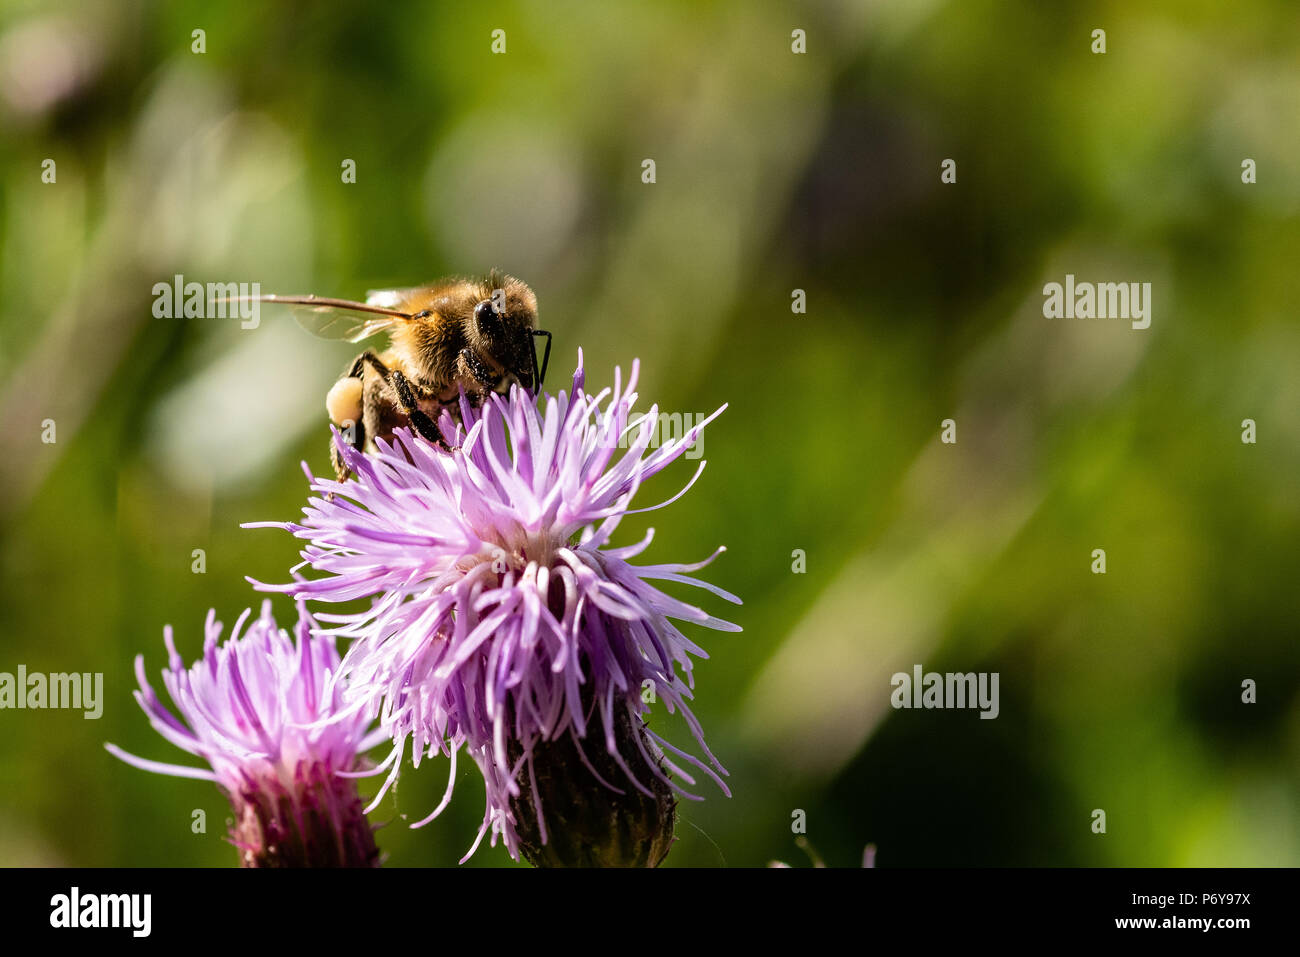 Honey Bee, creeping thistle, Black Forest, Germany Stock Photo